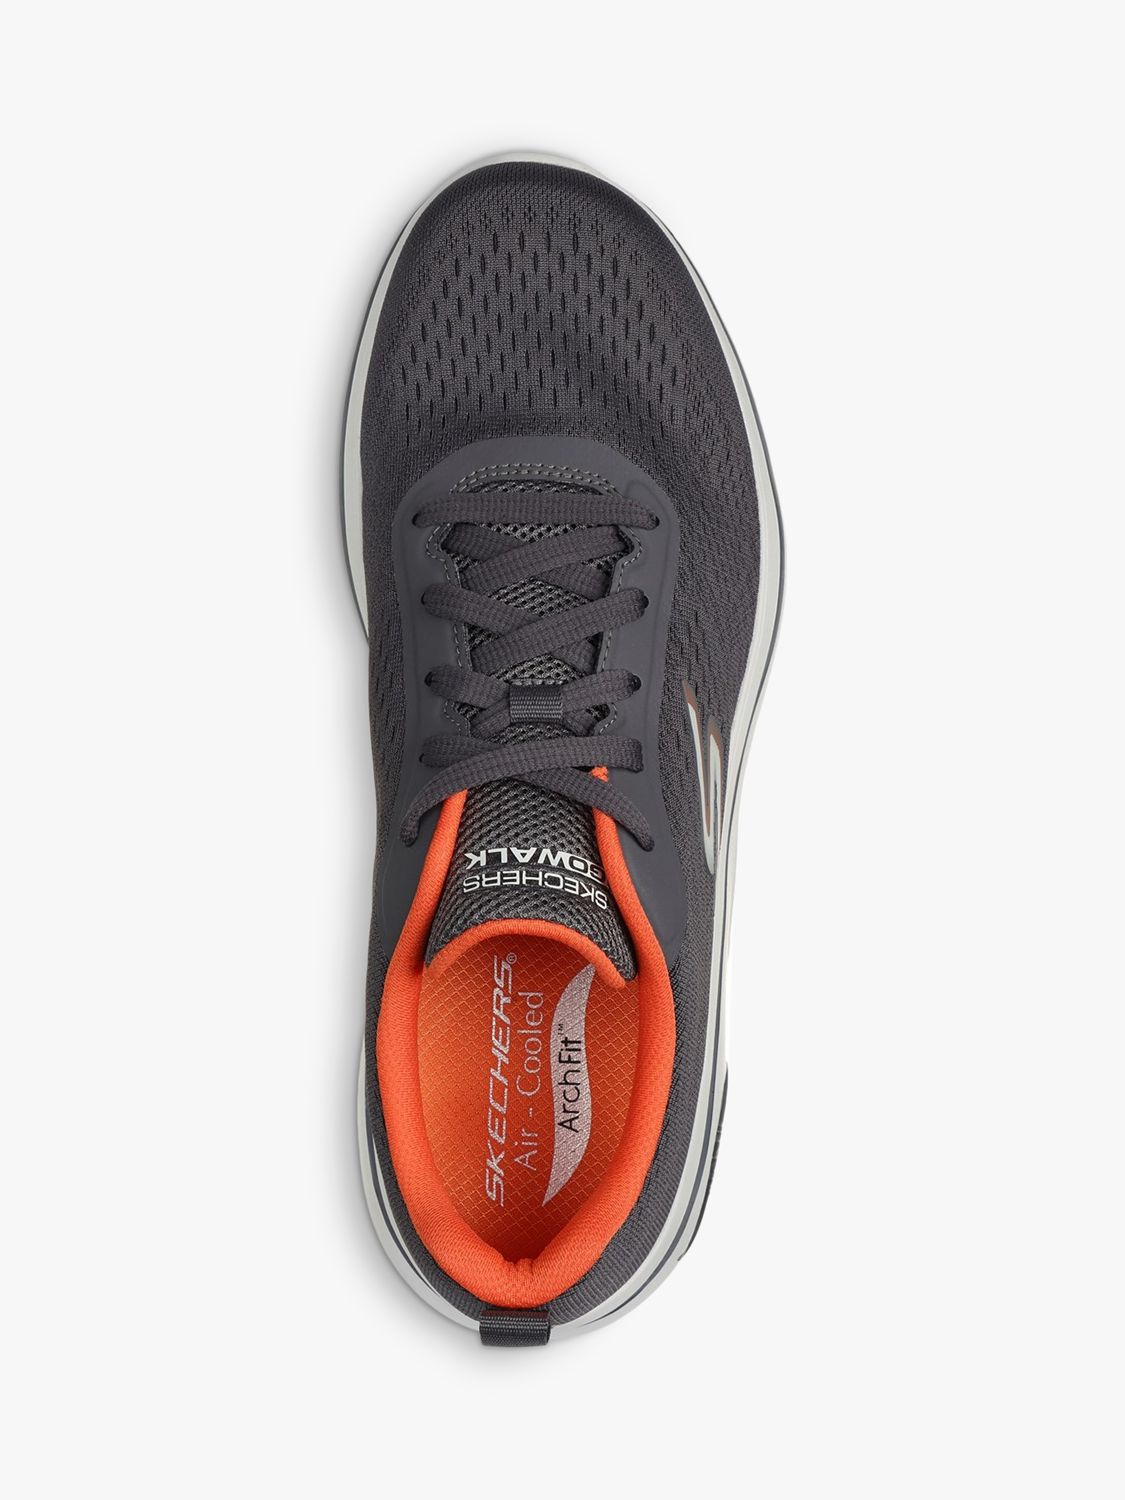 Buy Skechers Go Walk Arch Fit 2.0 Idyllic Trainers Online at johnlewis.com